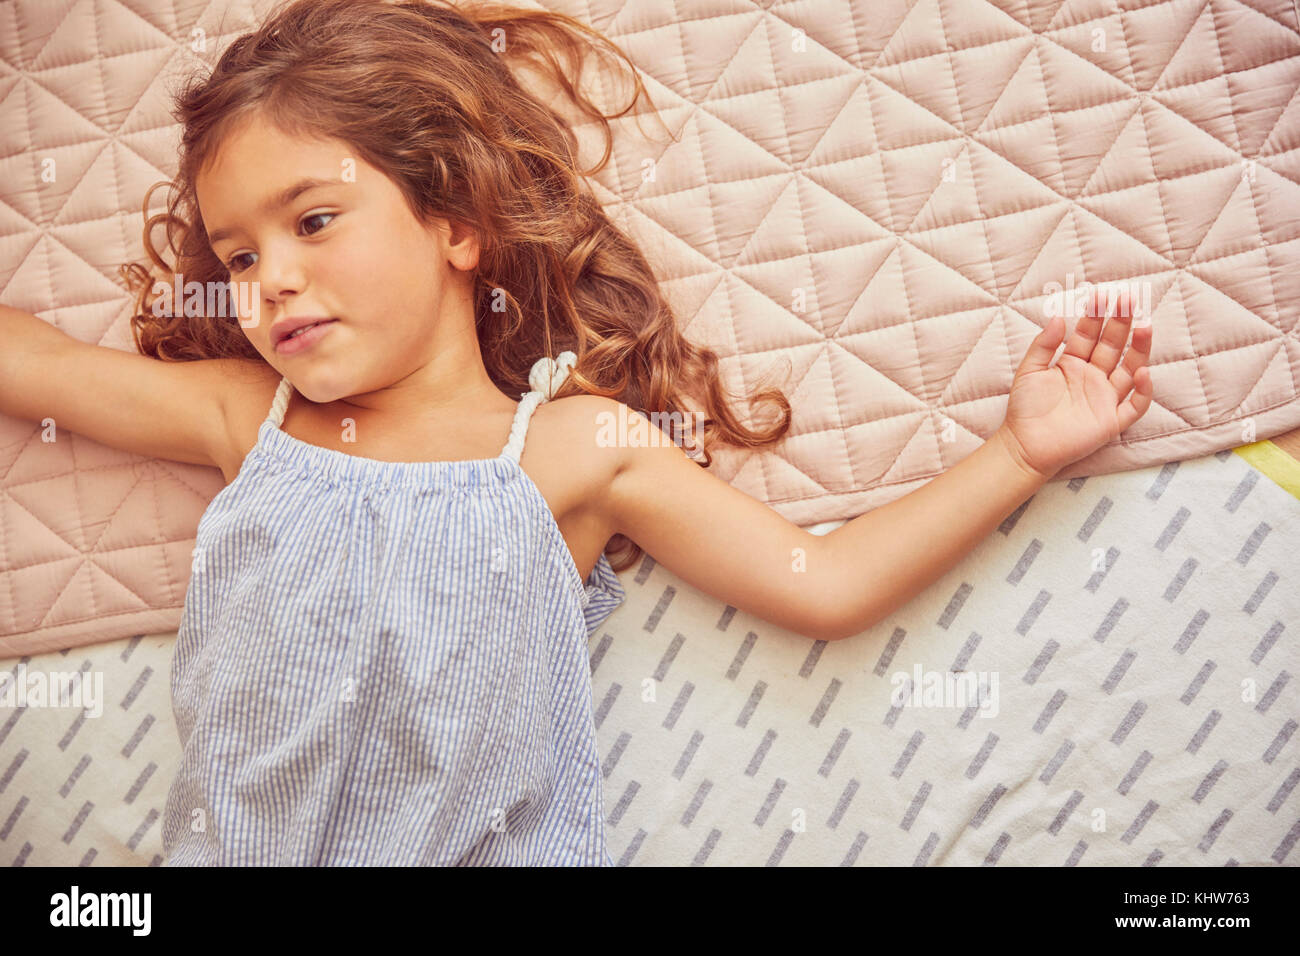 Young girl lying on bed, thoughtful expressions, overhead view Stock Photo